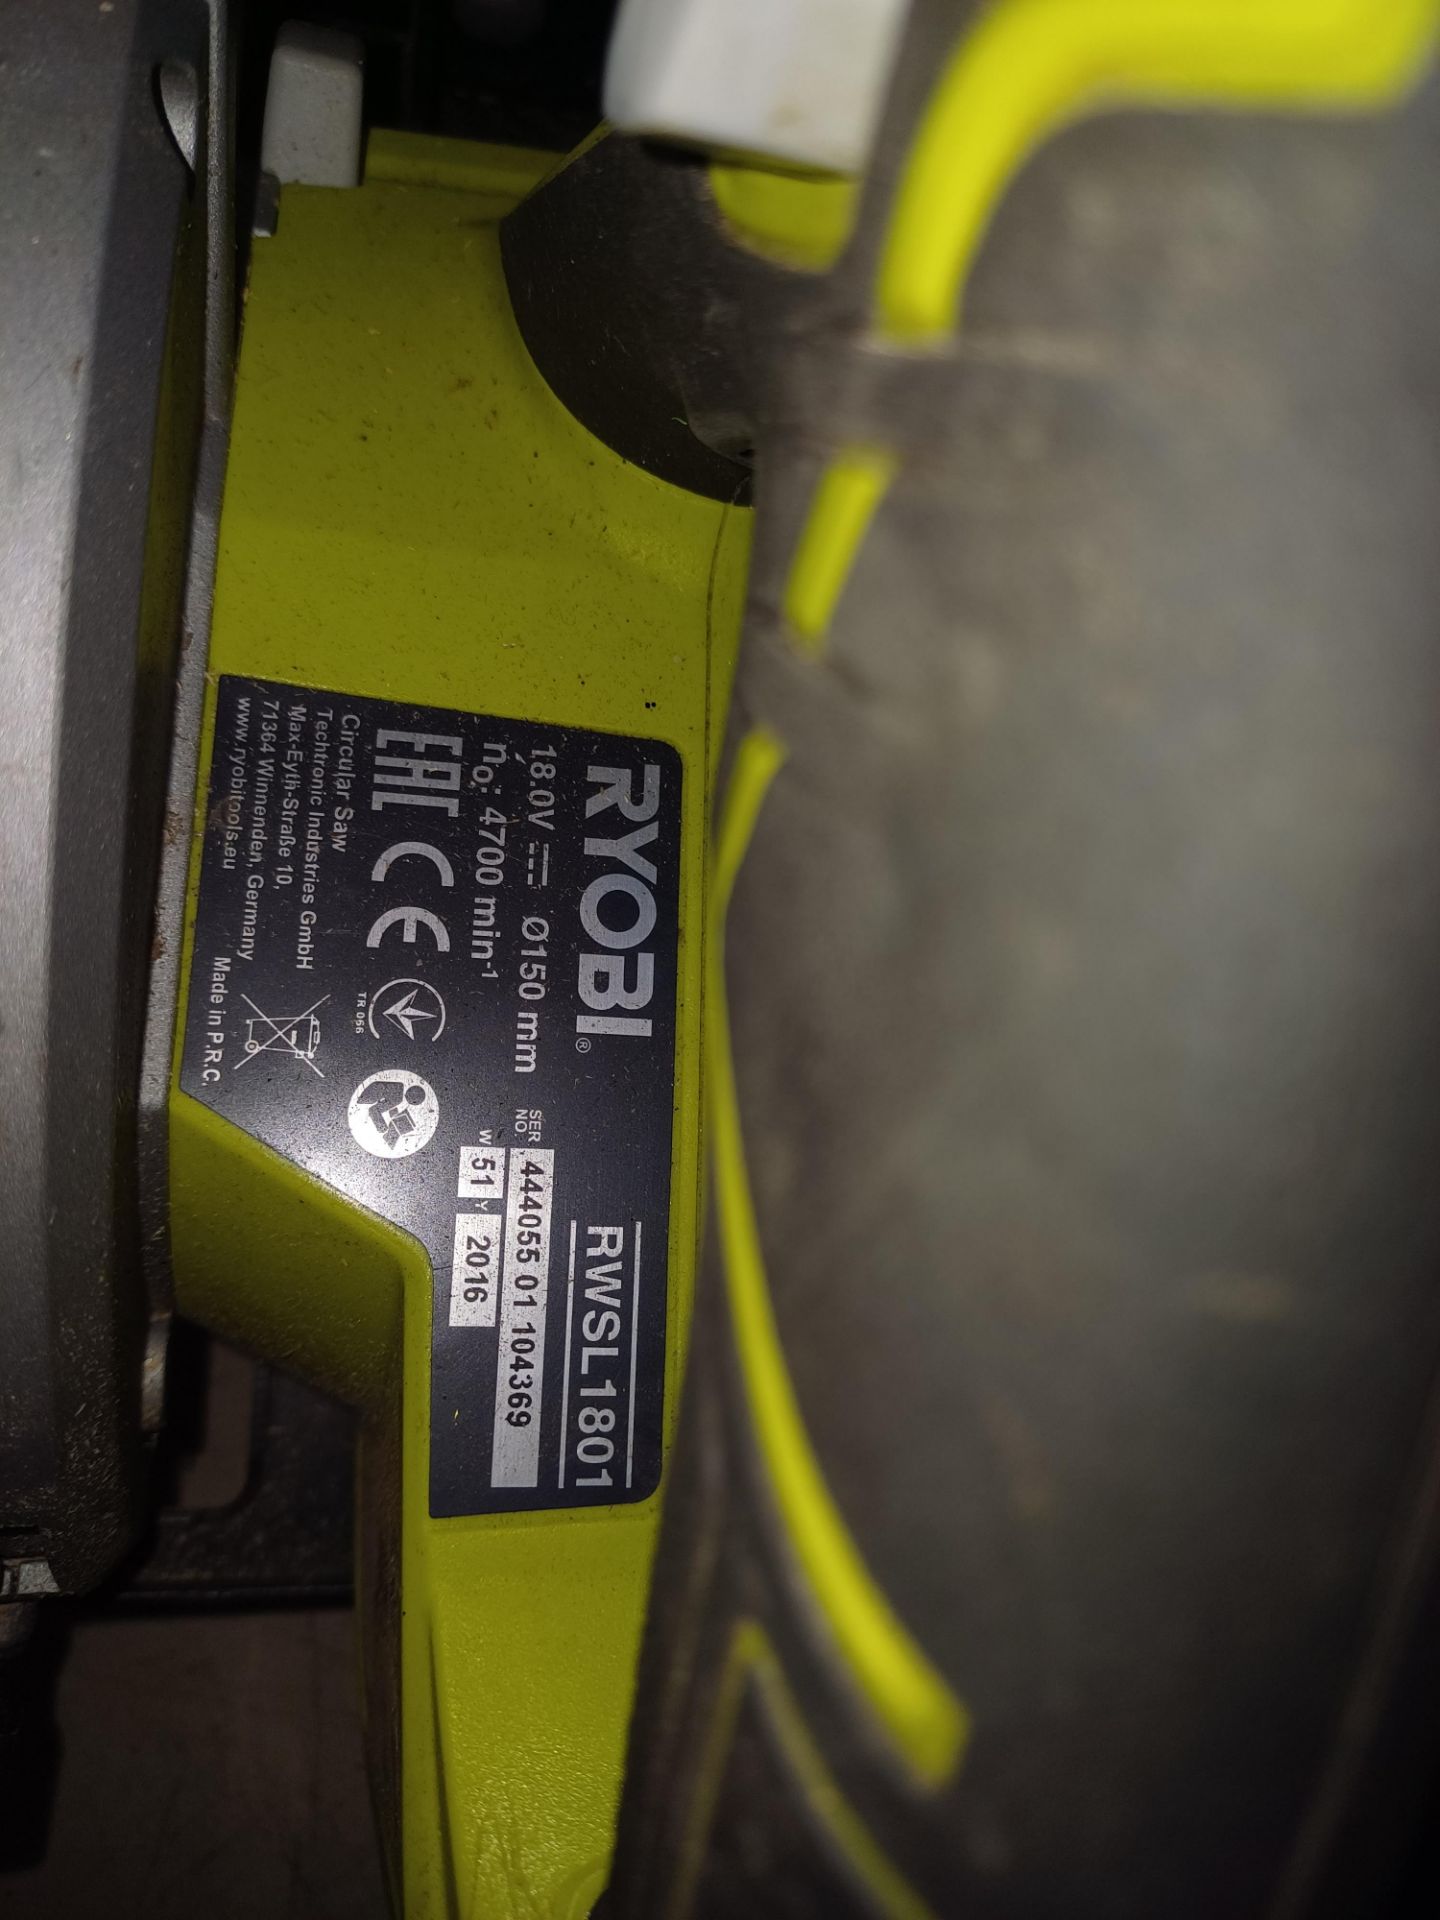 Ryobi 18 Volt Plain Circular Saw with 1 Battery & No Charger Serial NON: 4403701009610 (2006) - Image 3 of 4